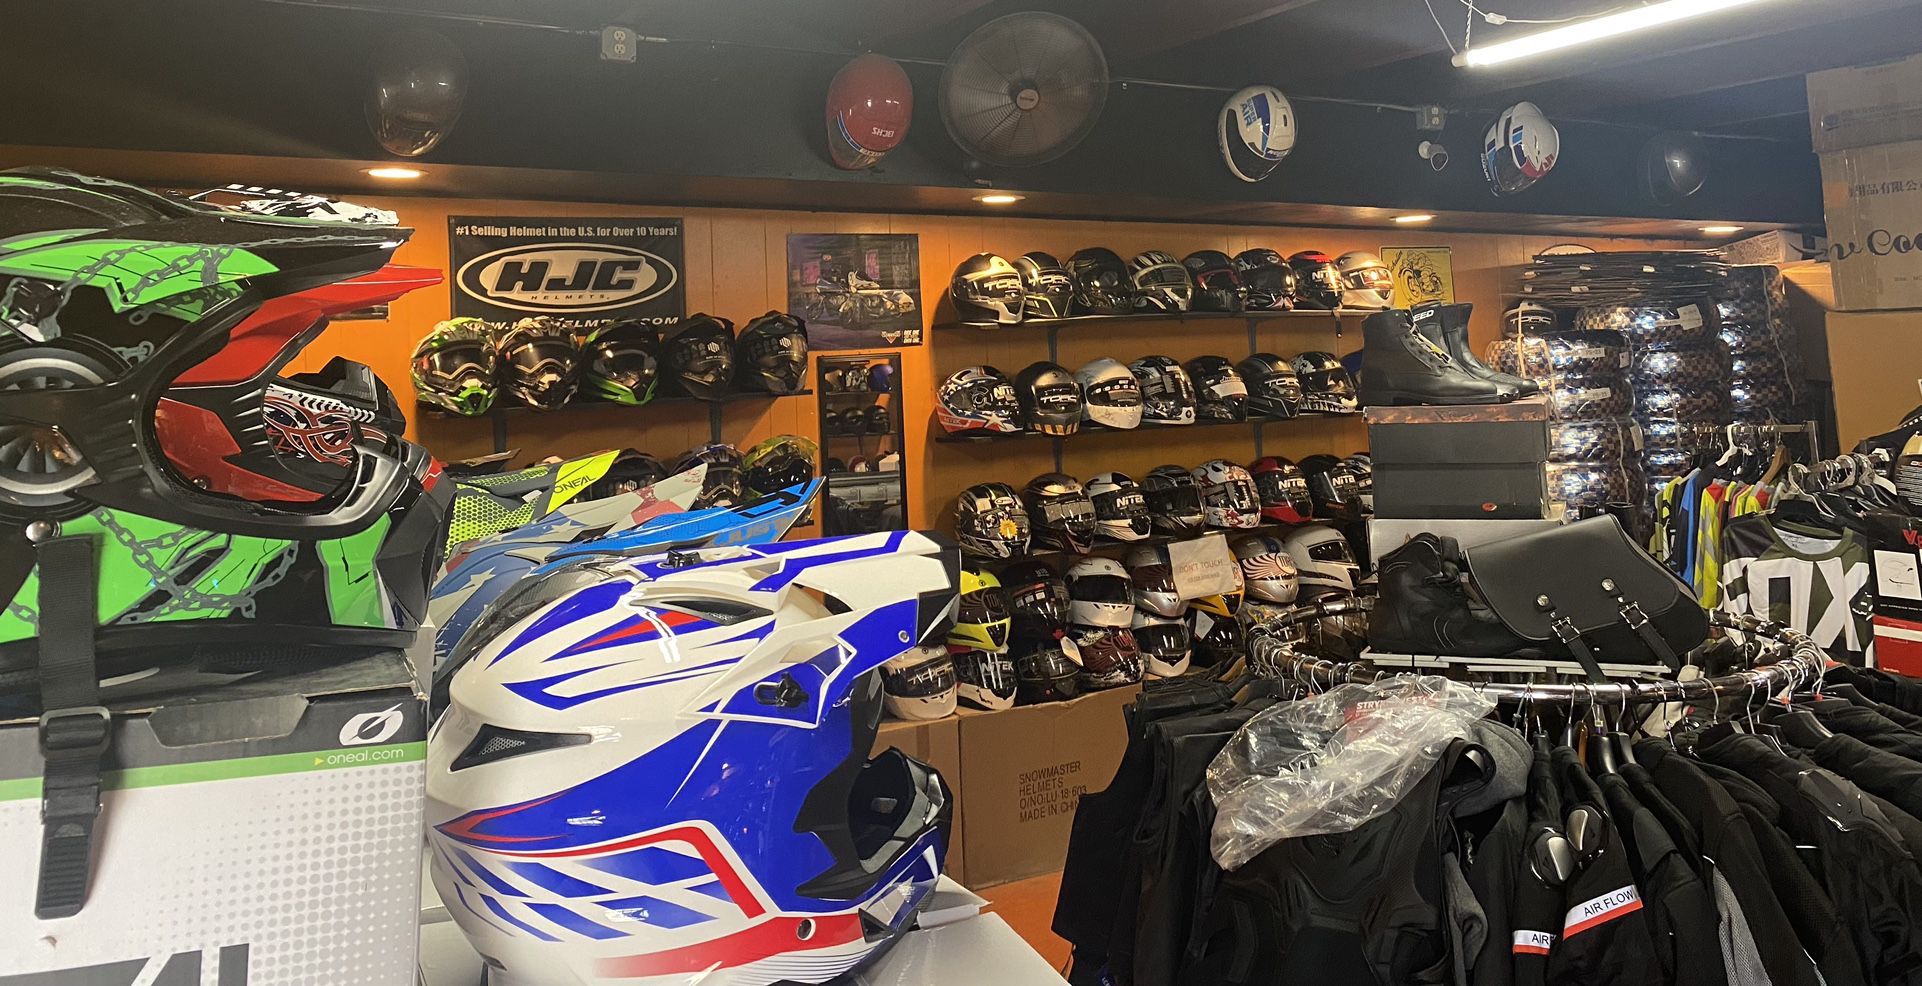 Motorcycle Helmet ( All Styles) Jackets Gloves & More $50+__13456 Telegraph Rd Whittier 